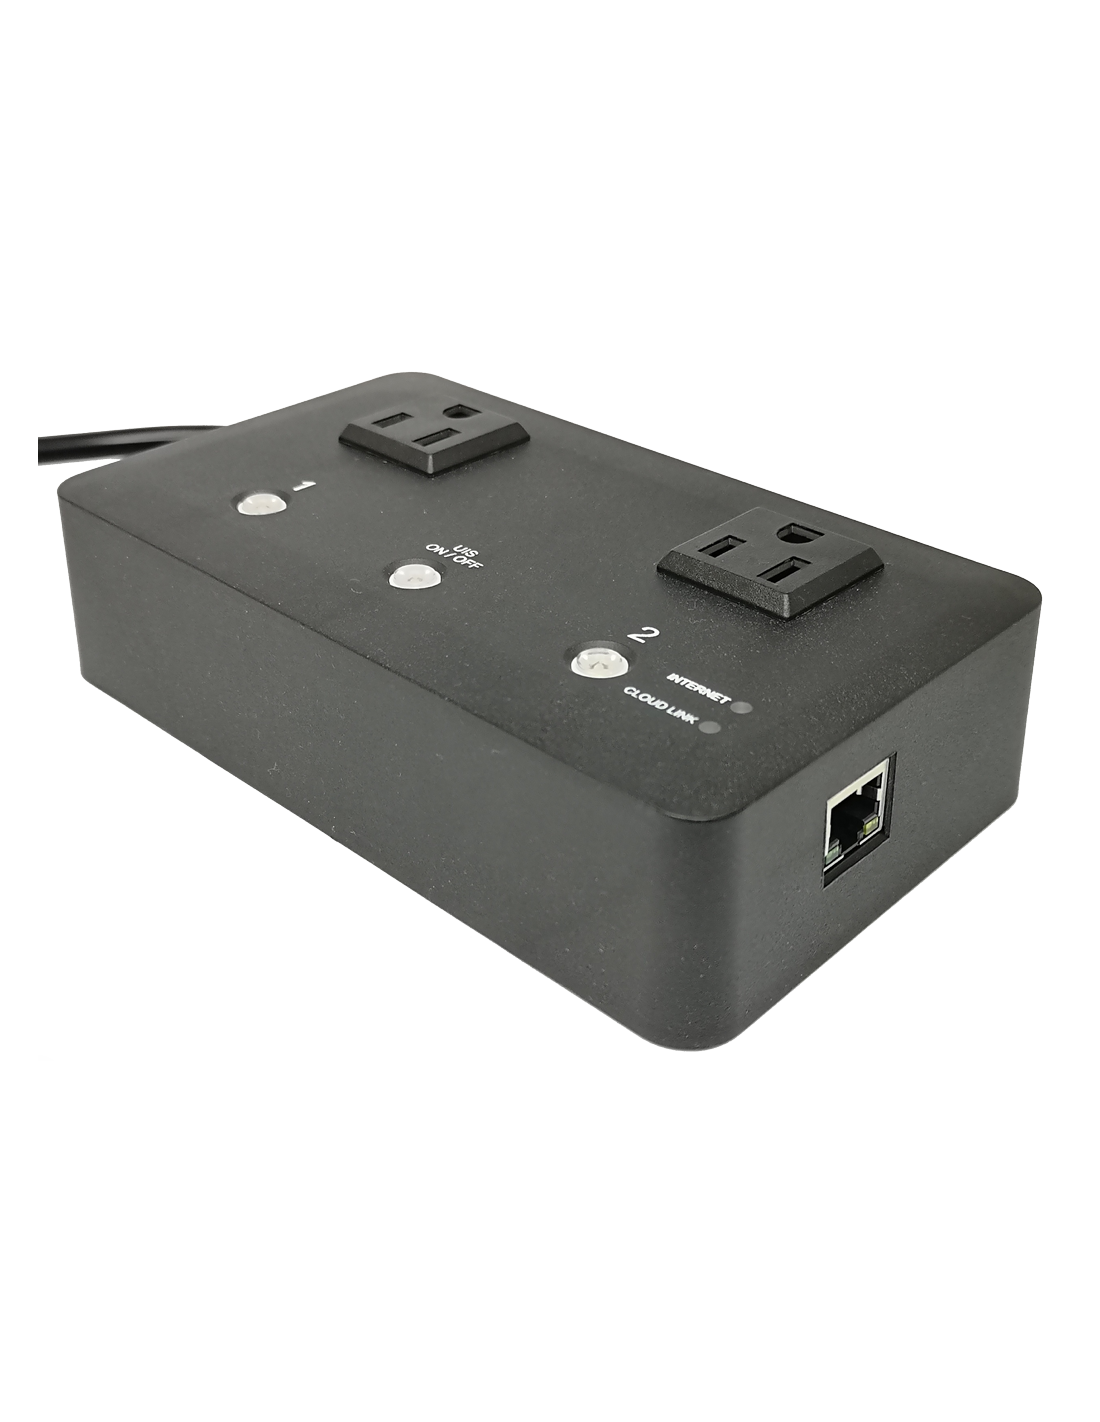 https://corpshadow.biz/1292-thickbox_default/ip-remote-power-switch-2-outlets.jpg